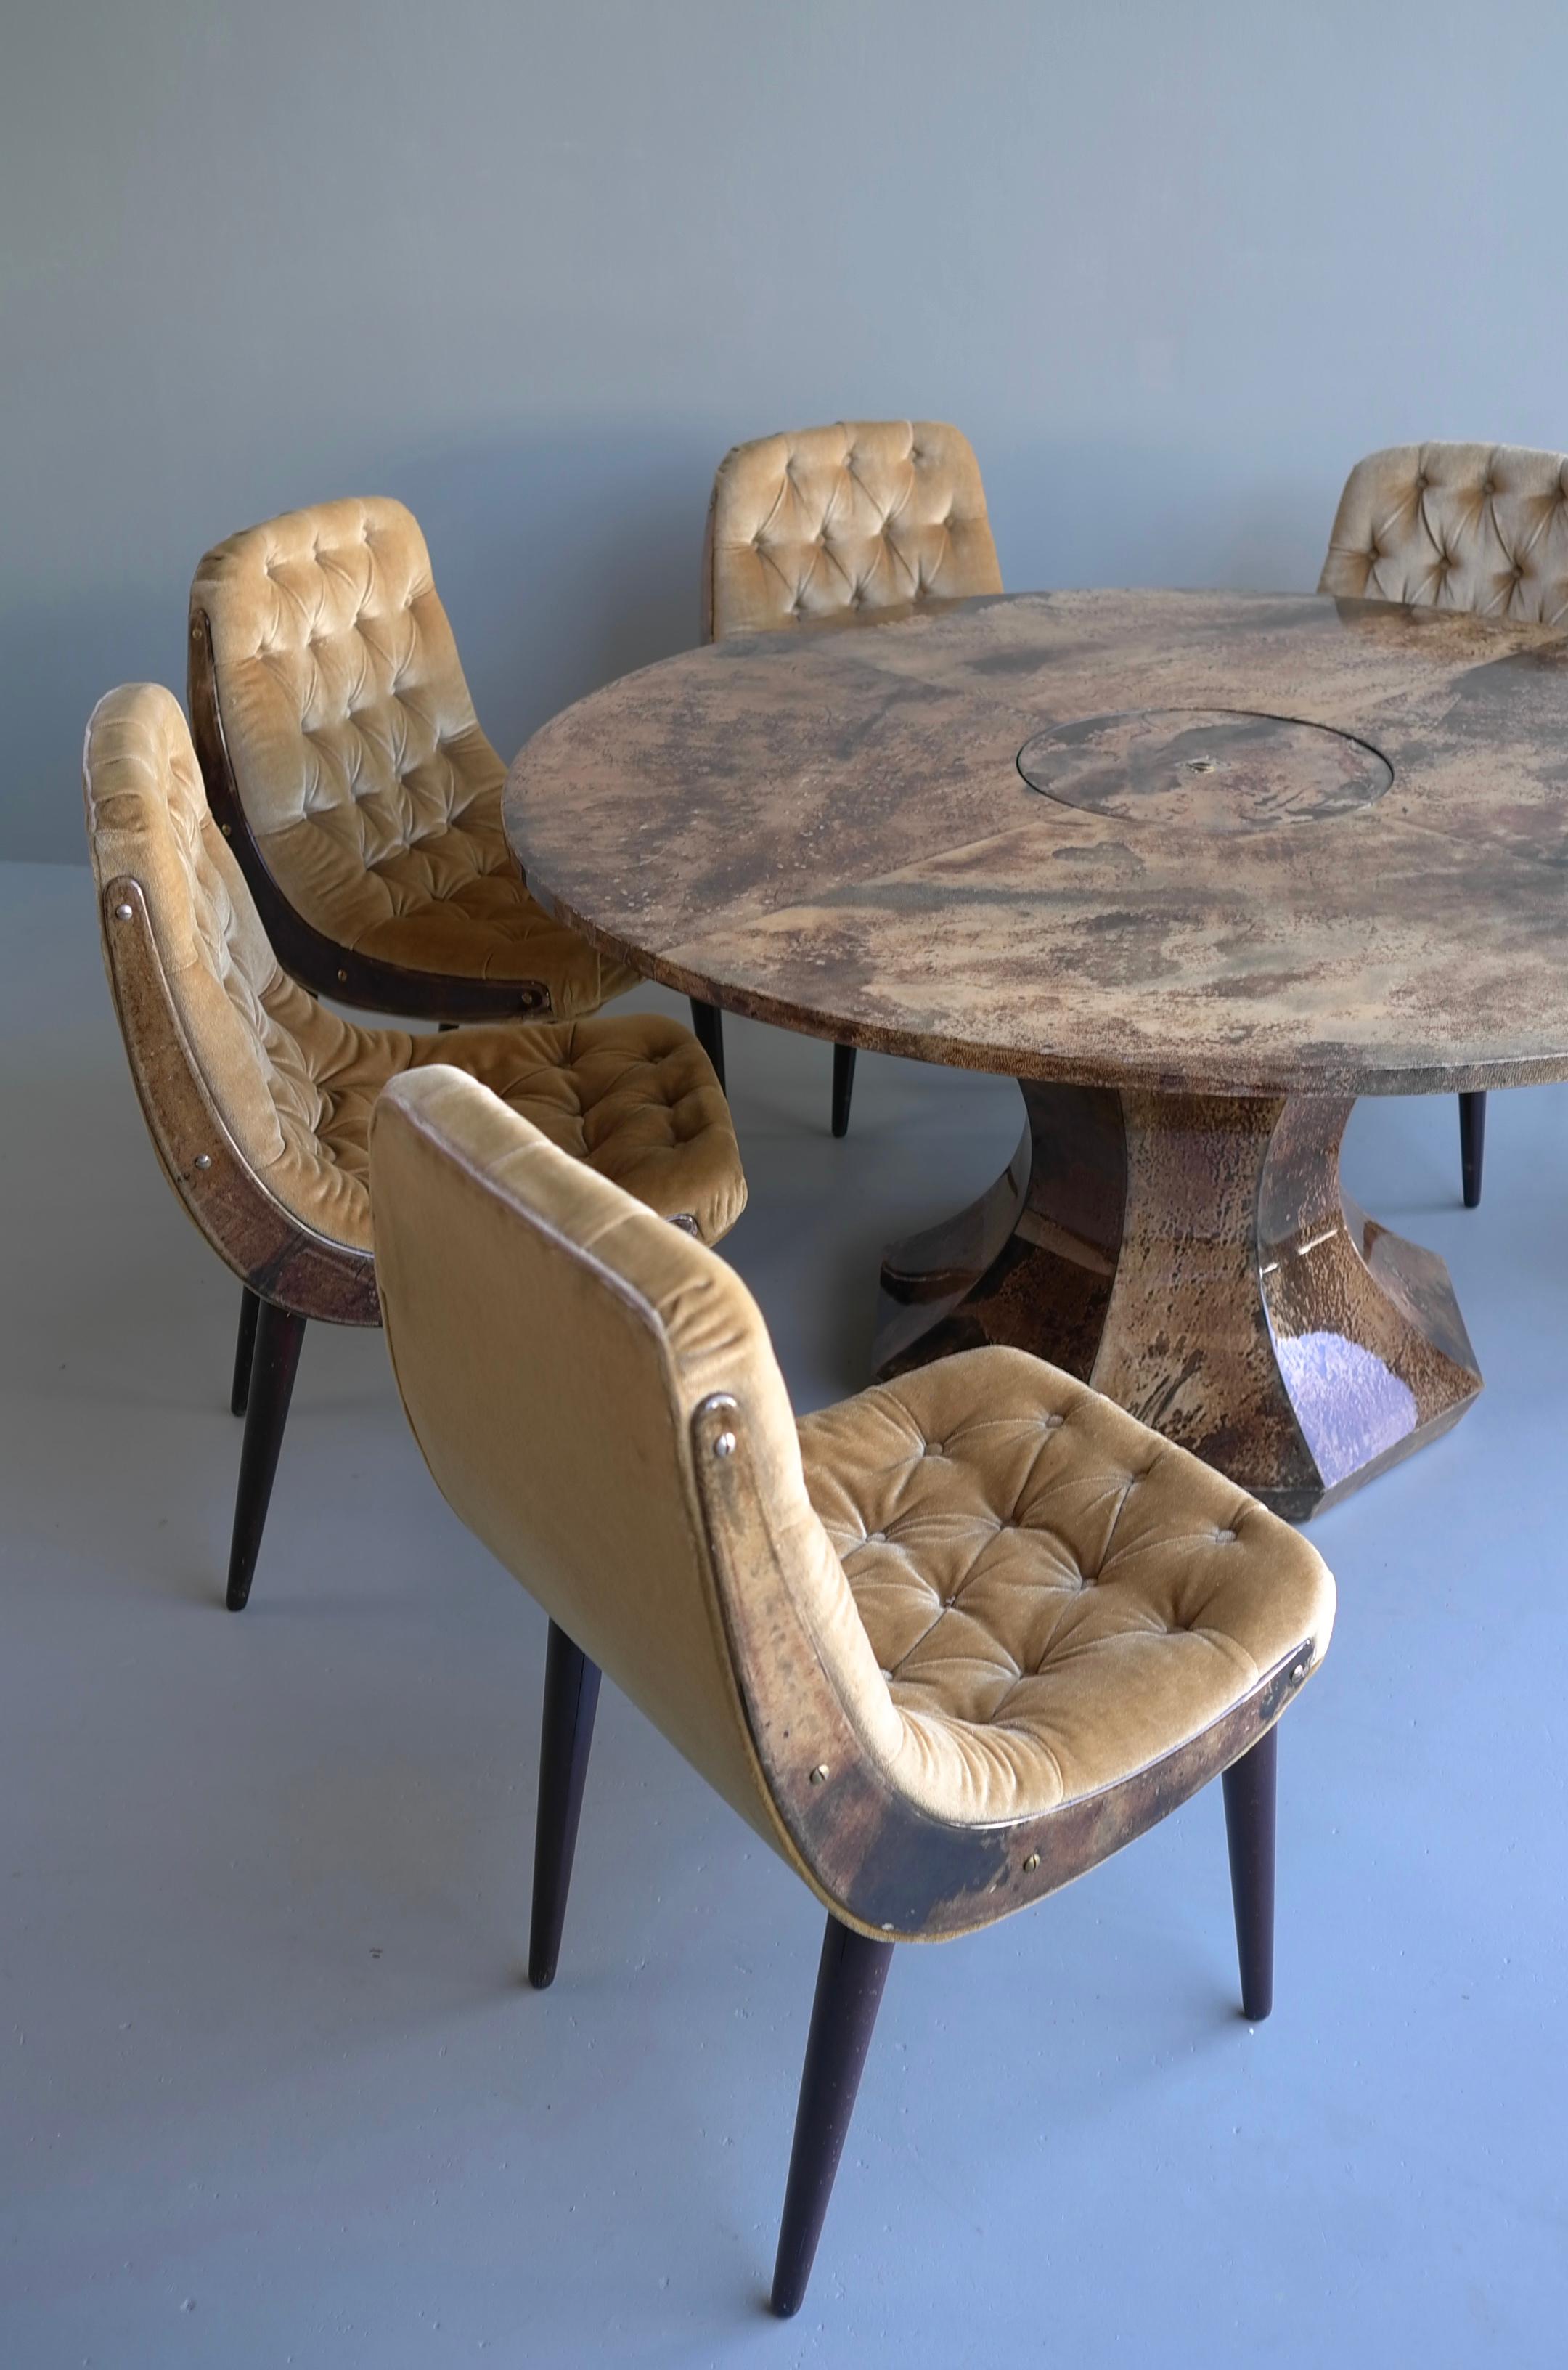 Aldo Tura Dining Set, Goatskin Parchment Table with 6 Velvet Chairs, Italy 1950s For Sale 3